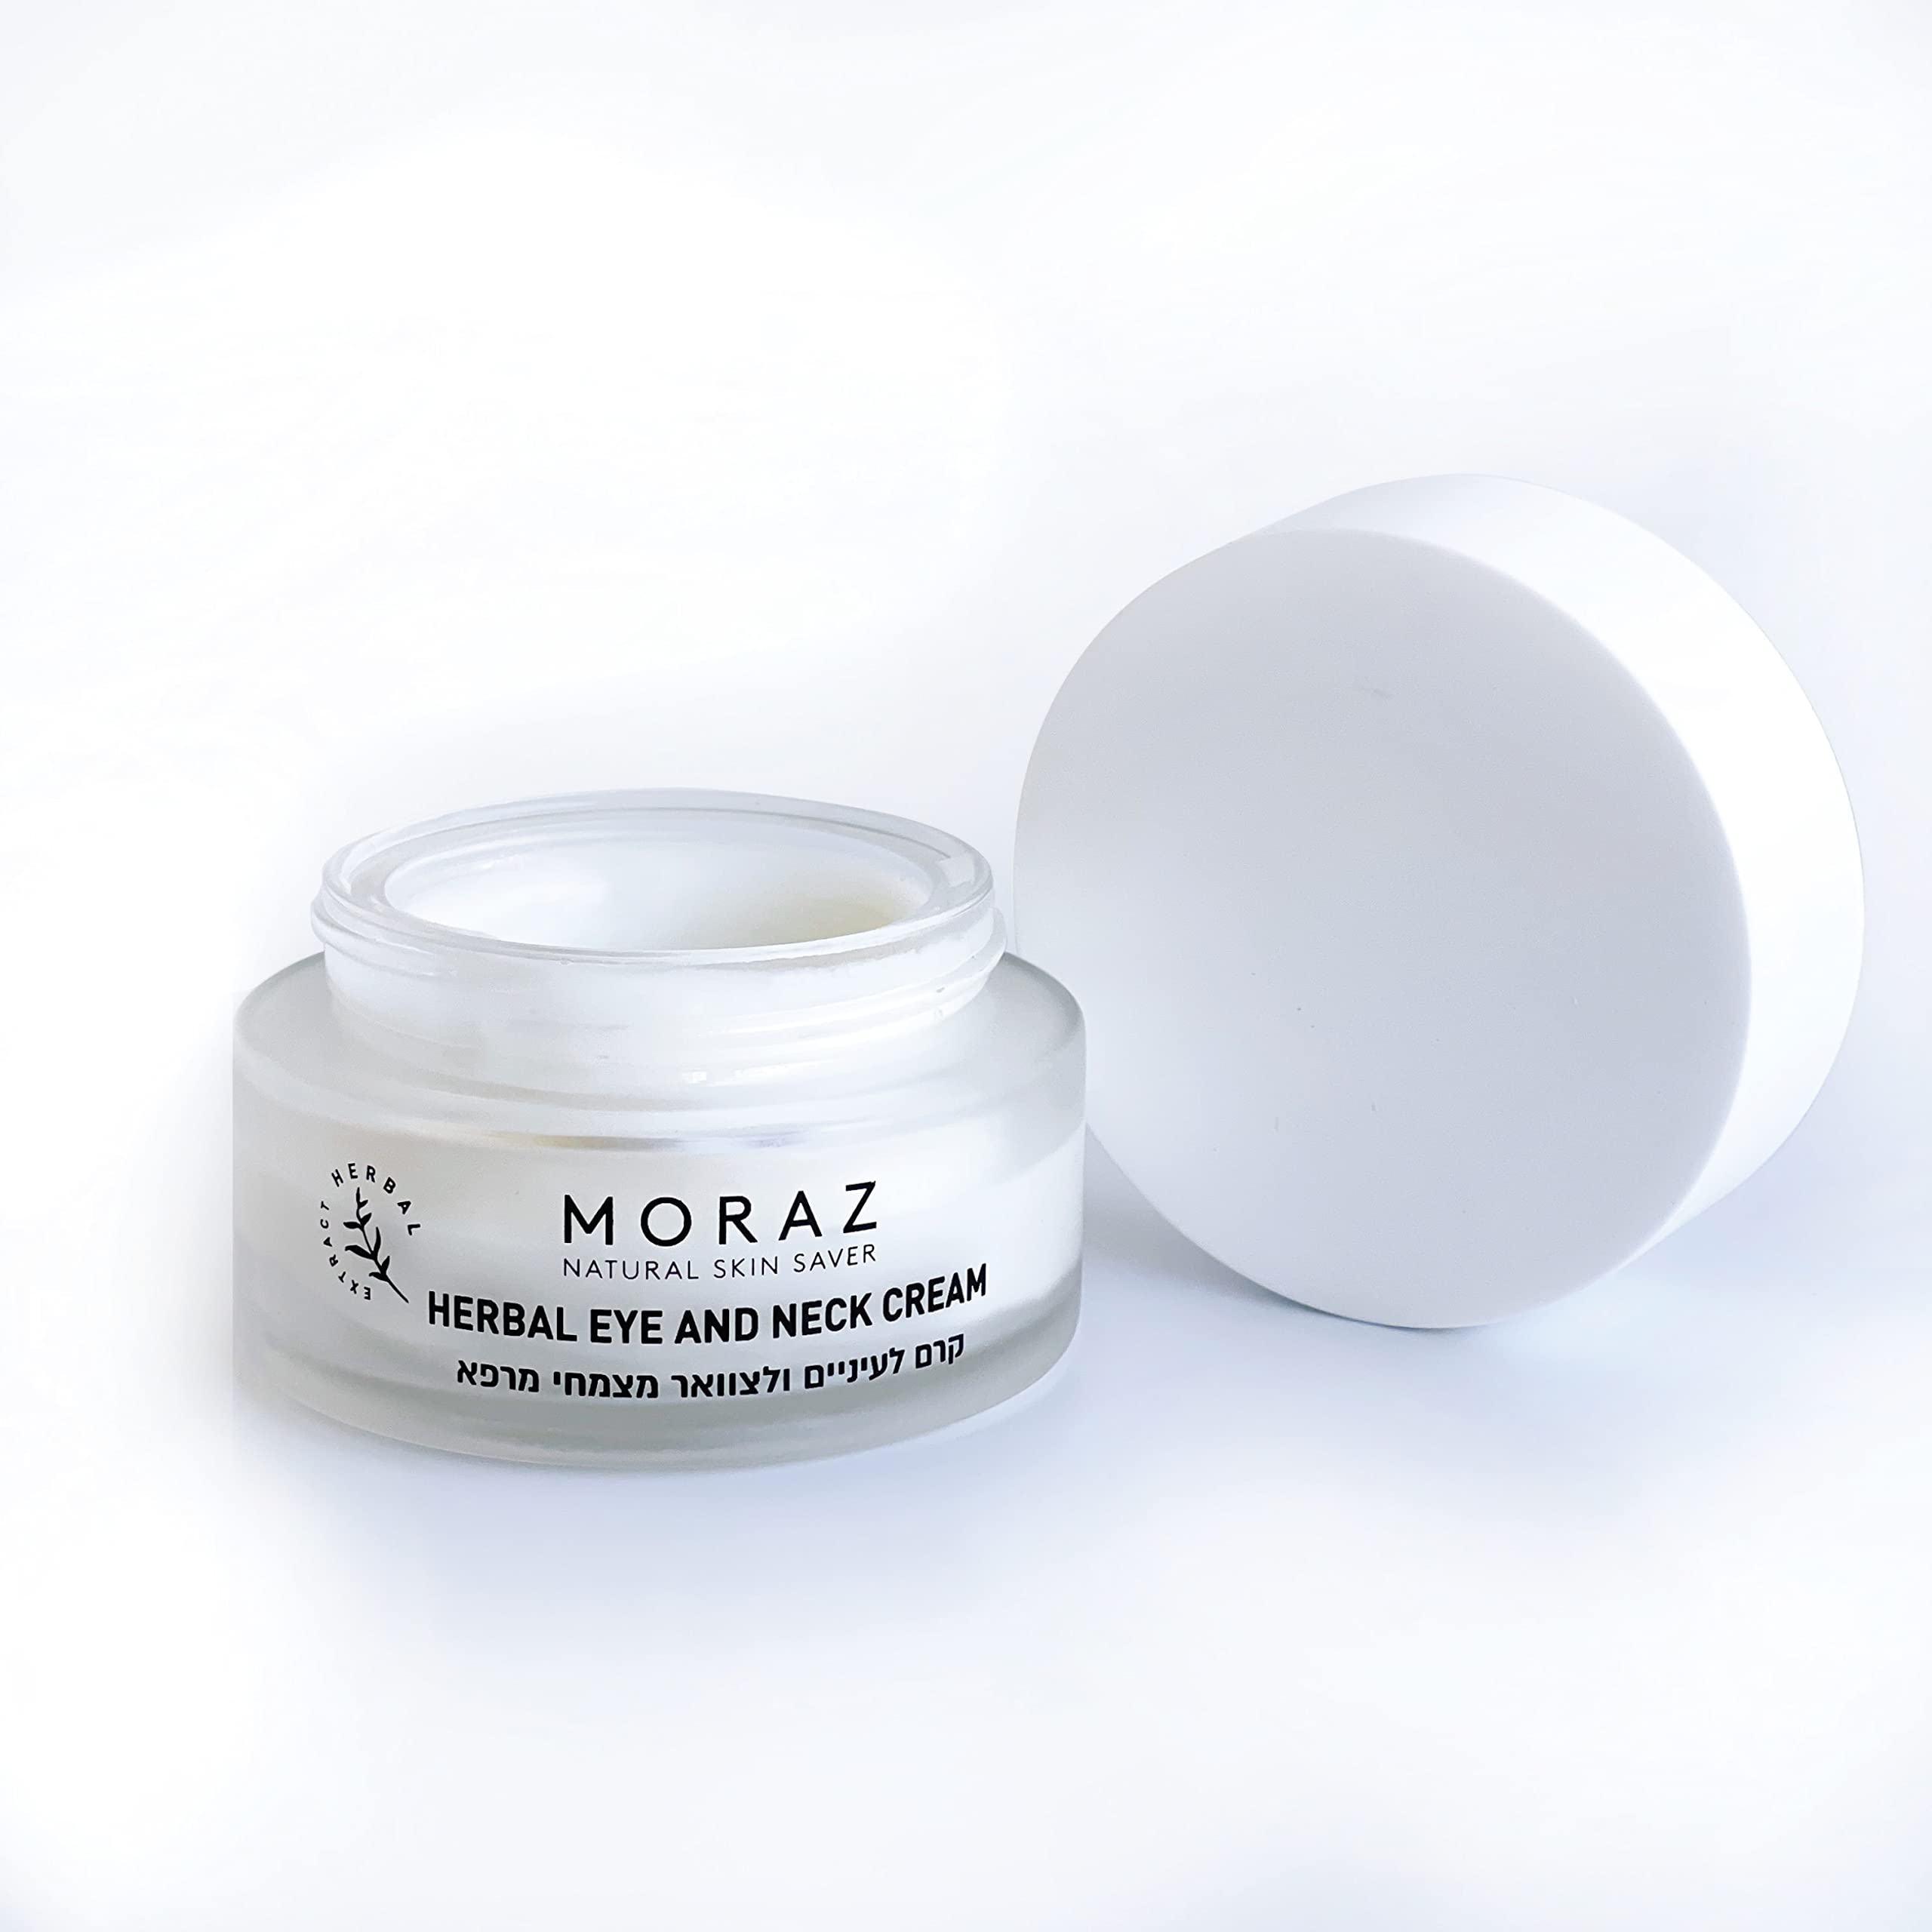 Moraz Skincare Revitalift Anti-Wrinkle Eye Cream for Women | Organic & Sooting Under Eye Cream for Dark Circles to Reduce Puffiness and Aging Lines with Shea Butter & Avocado Oil | 1.7 Oz